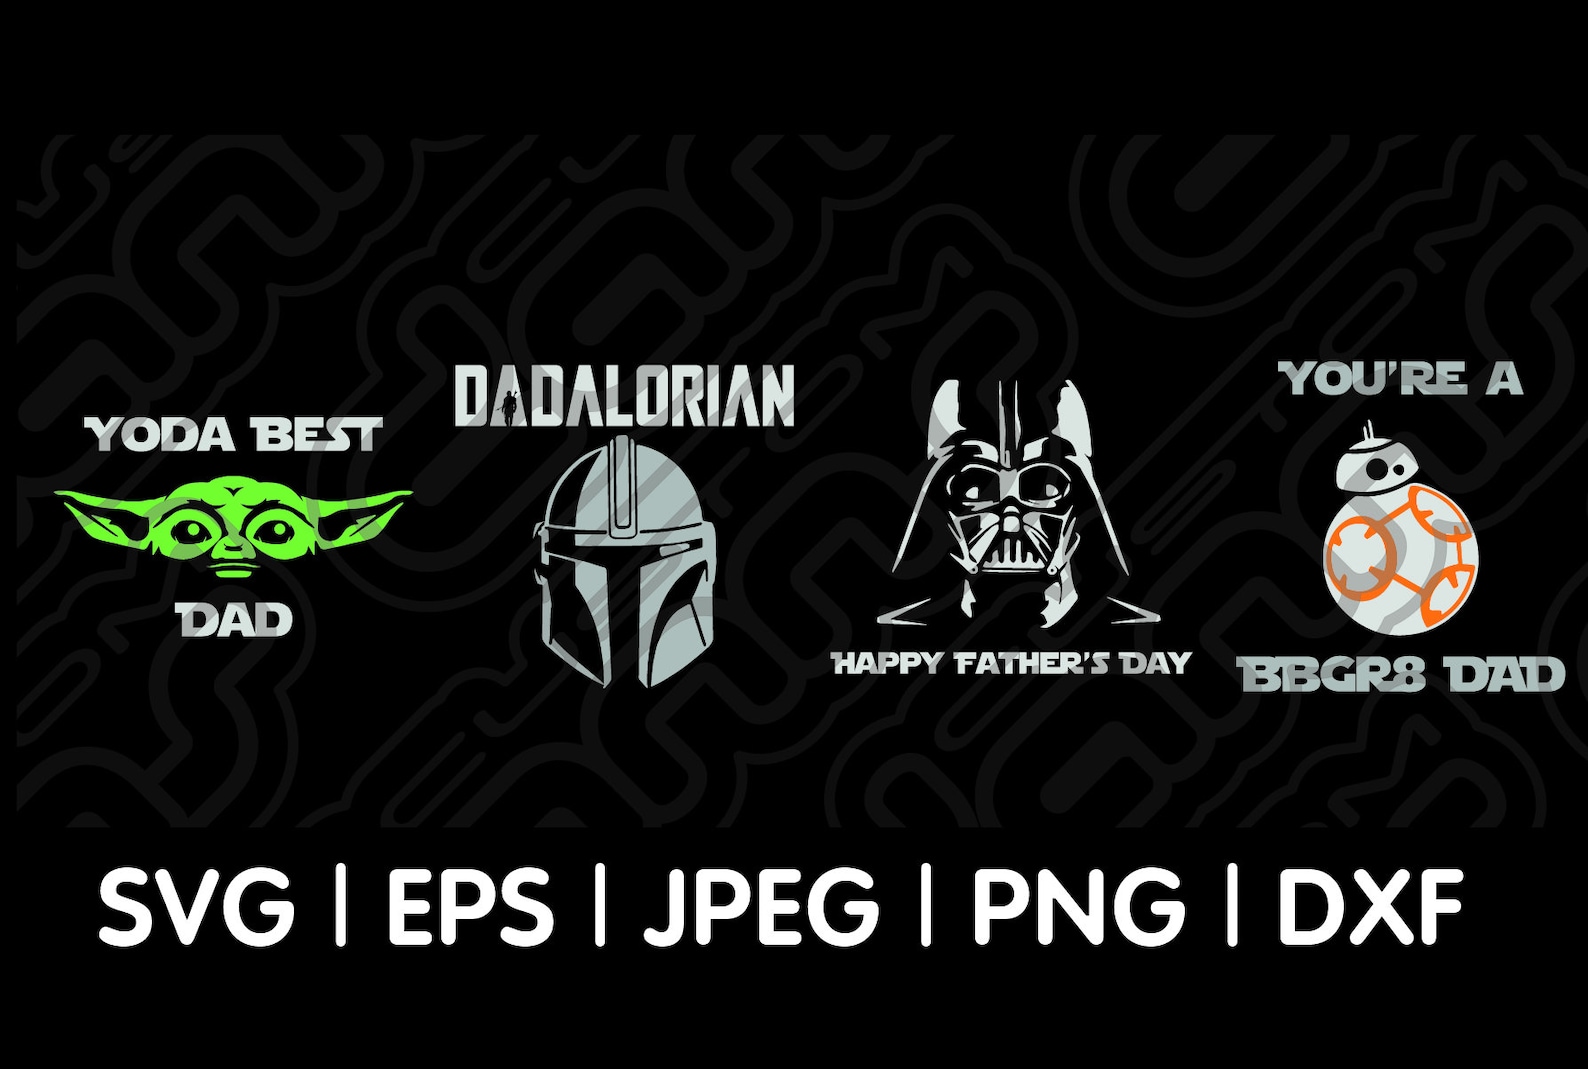 Download Fathers Day Star Wars svg eps jpg png dxf wall art T-shirt | Etsy